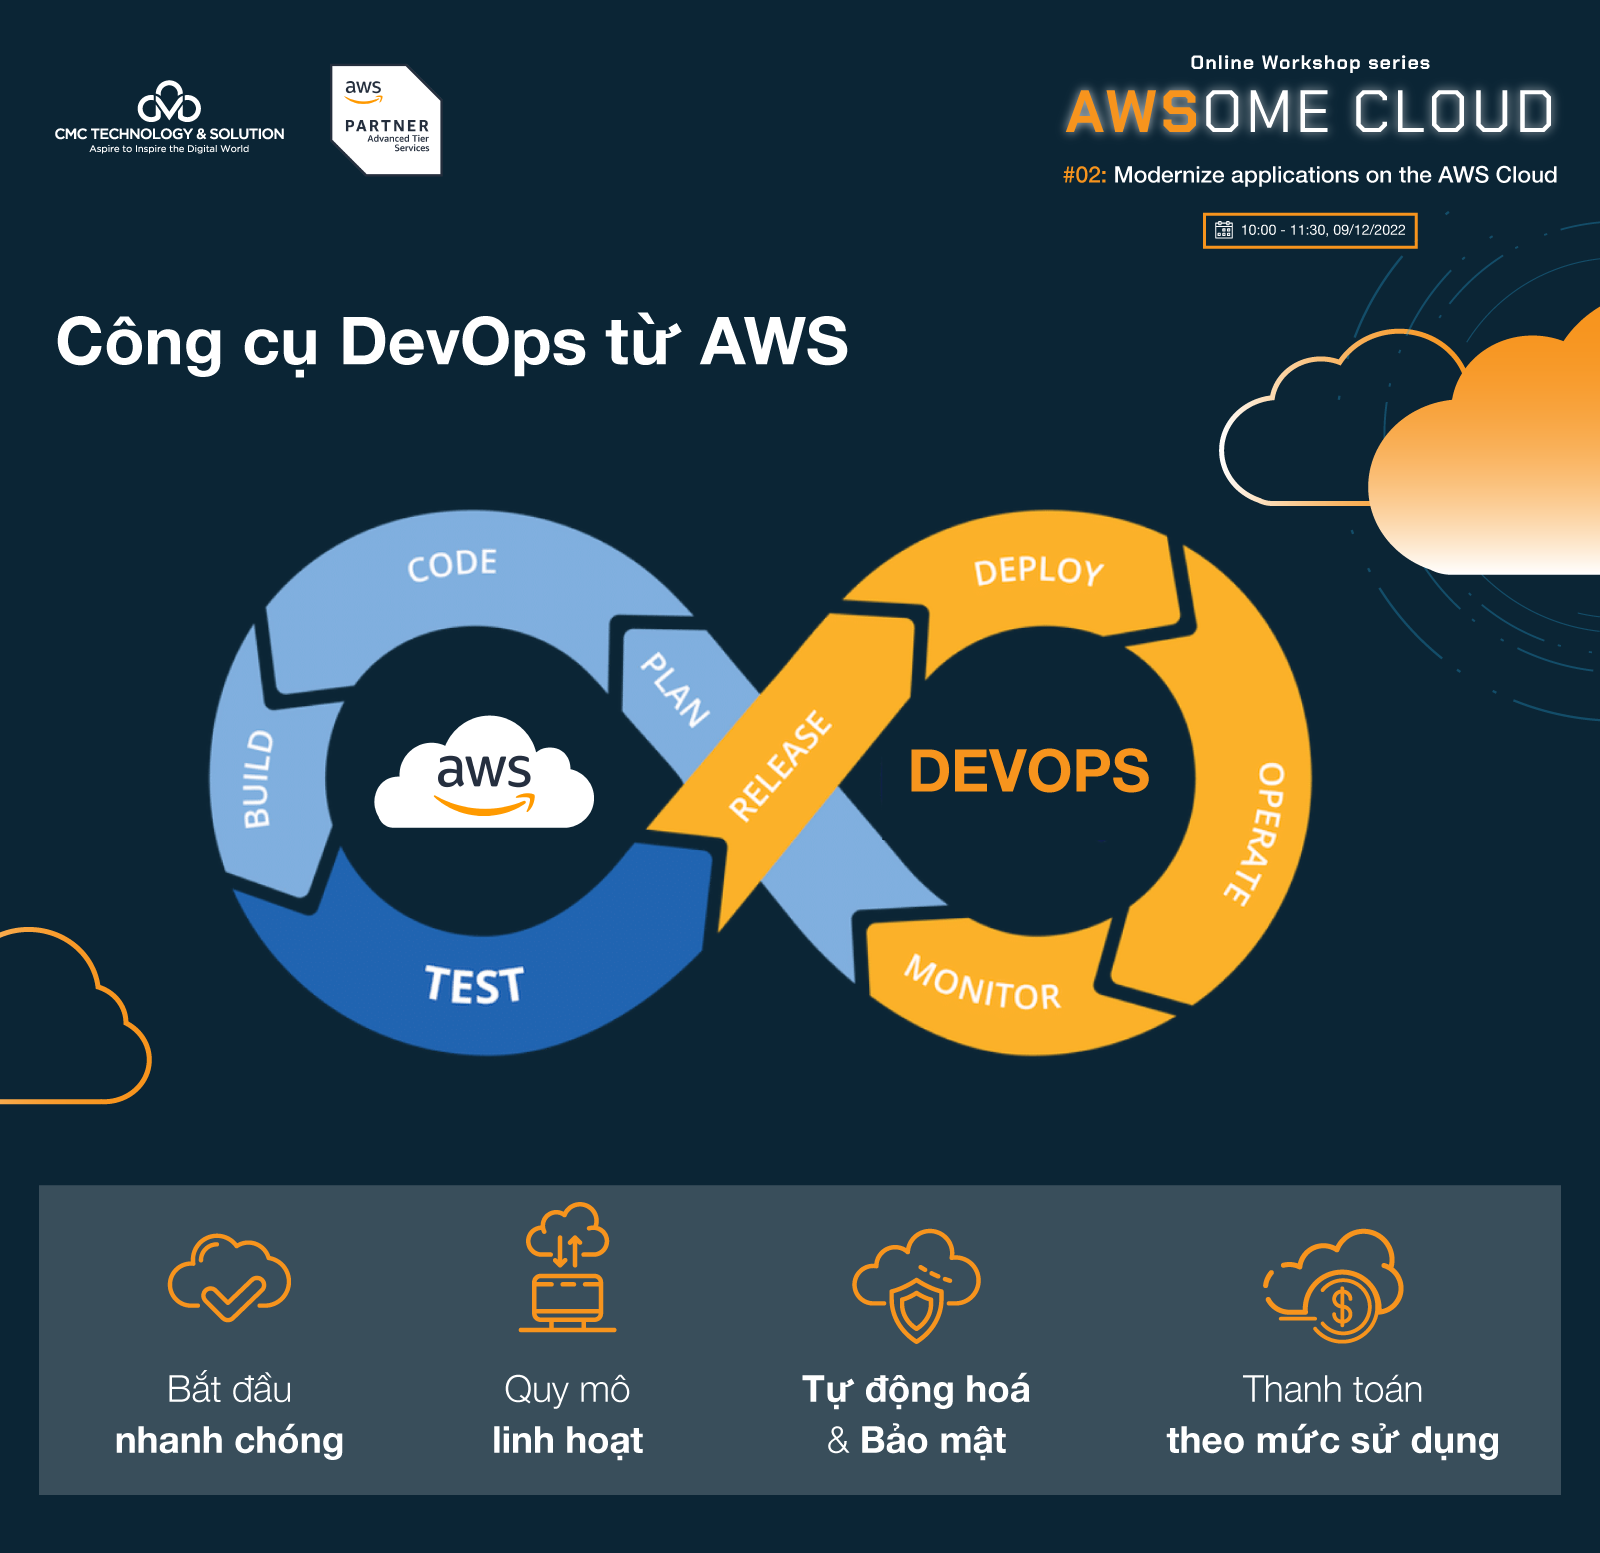 Accelerating application modernization with AWS cloud